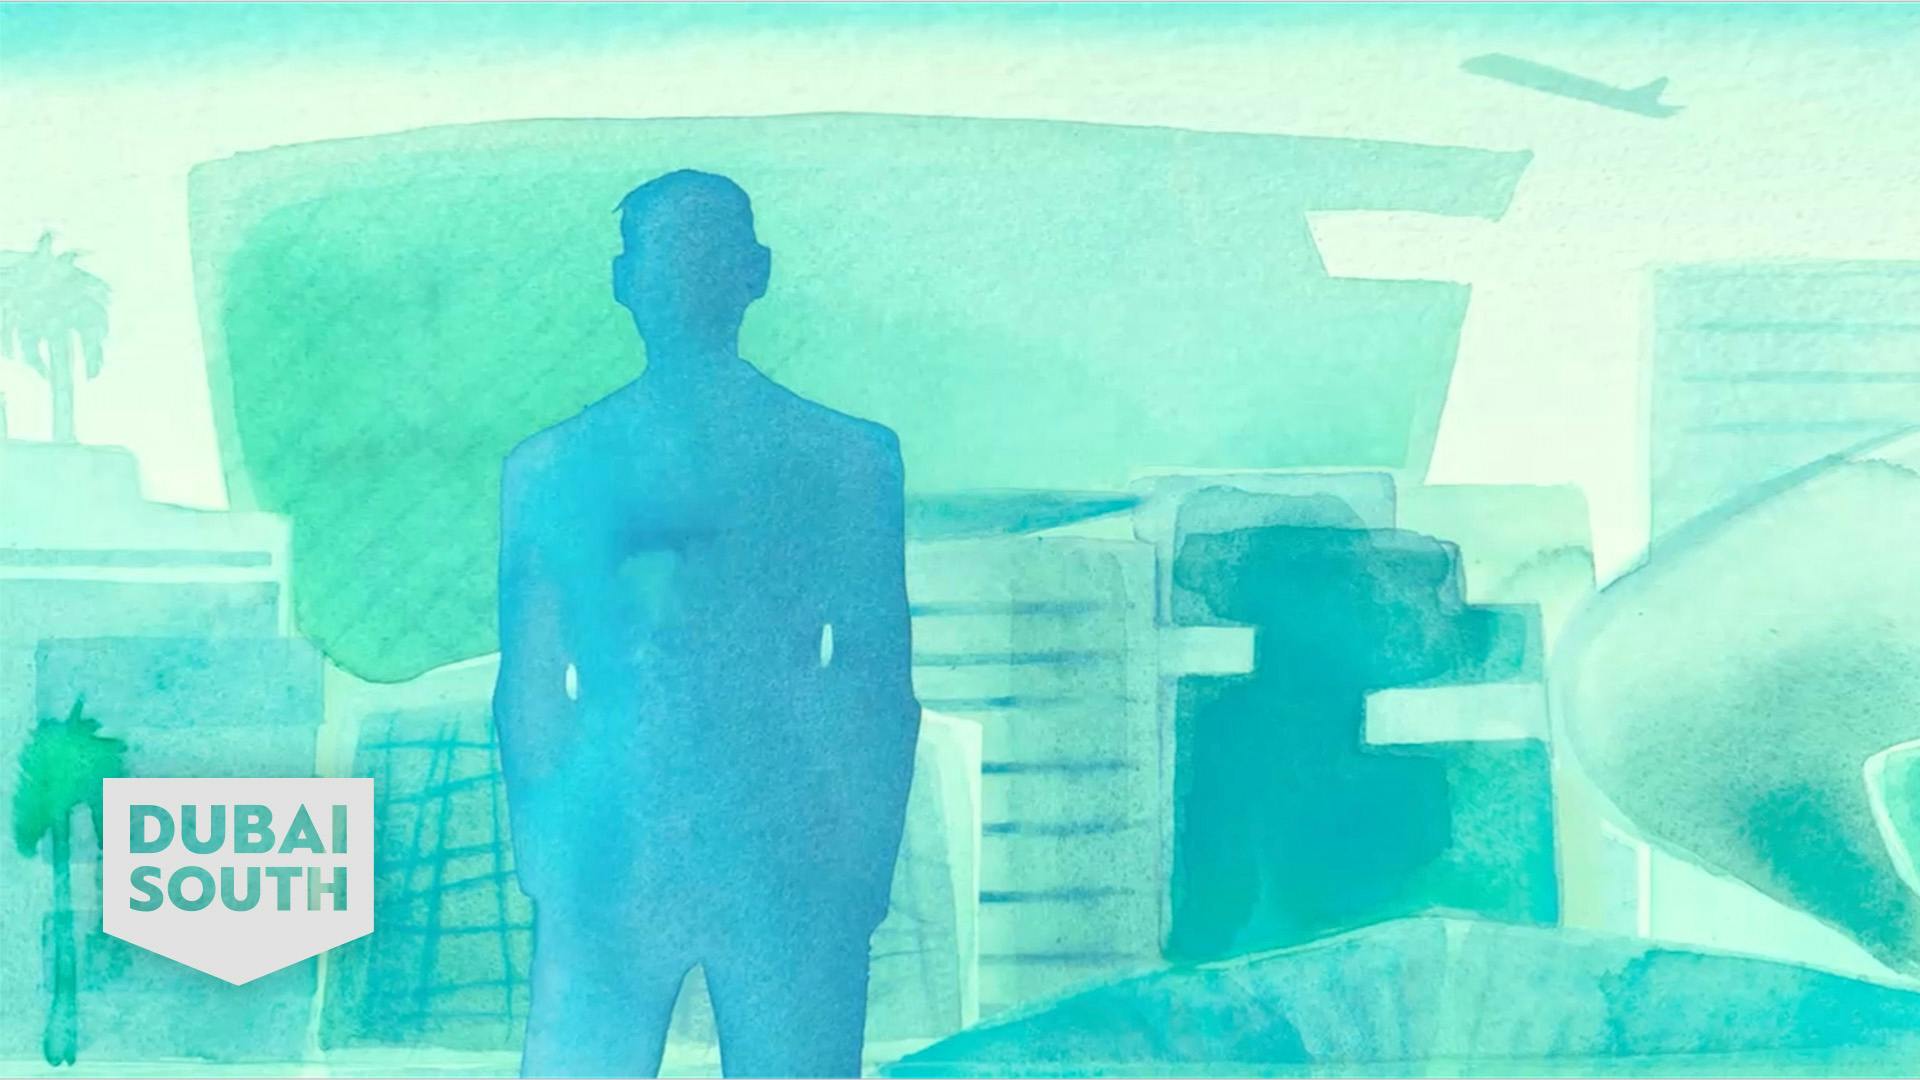 Watercolor aspect silhouette of a man standing in front of a cityscape.